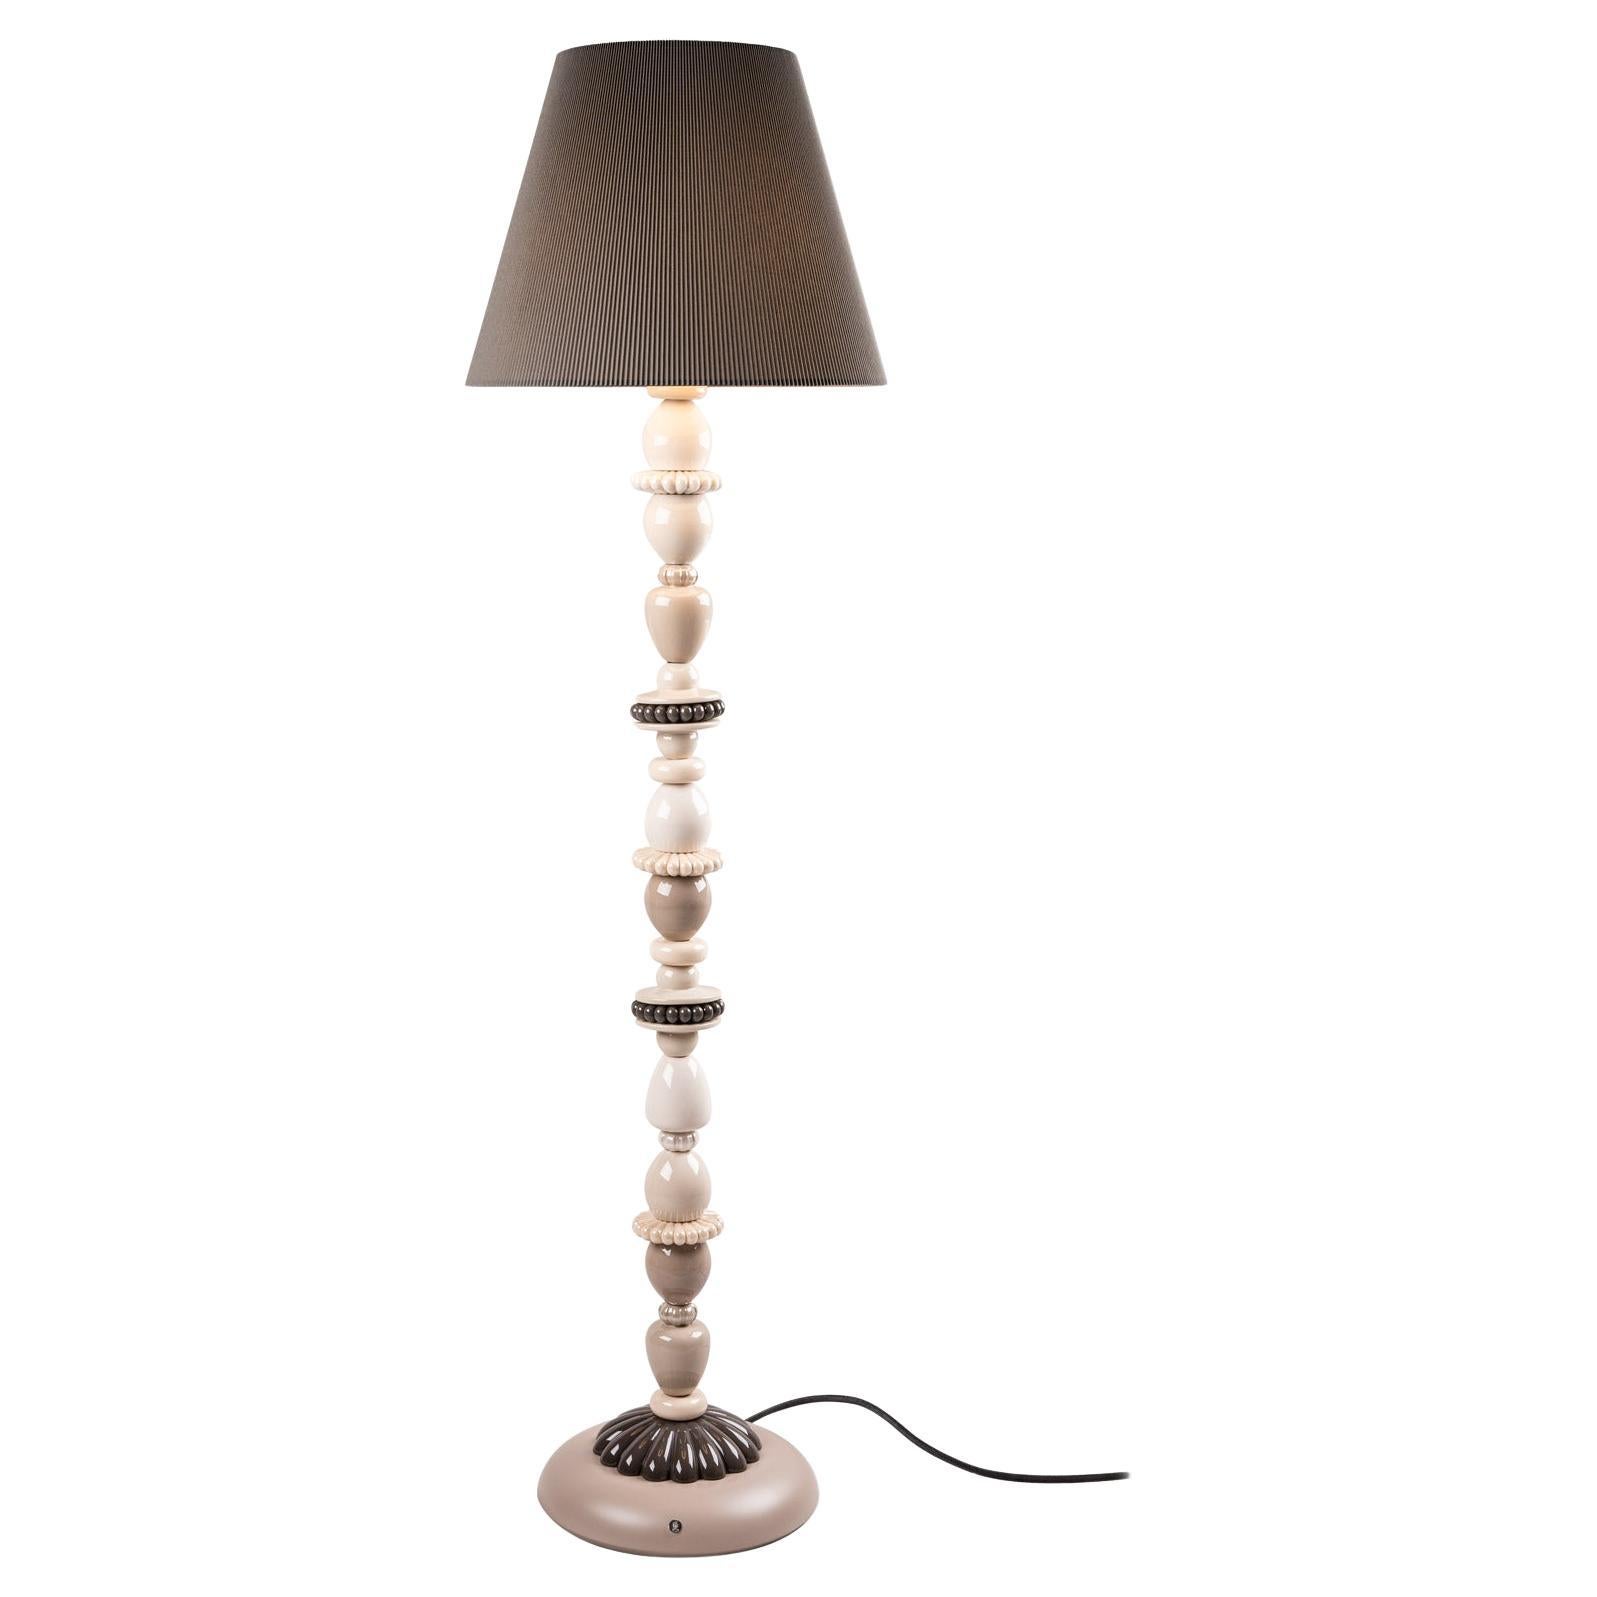 Firefly floor lamp. Pearly (US) For Sale